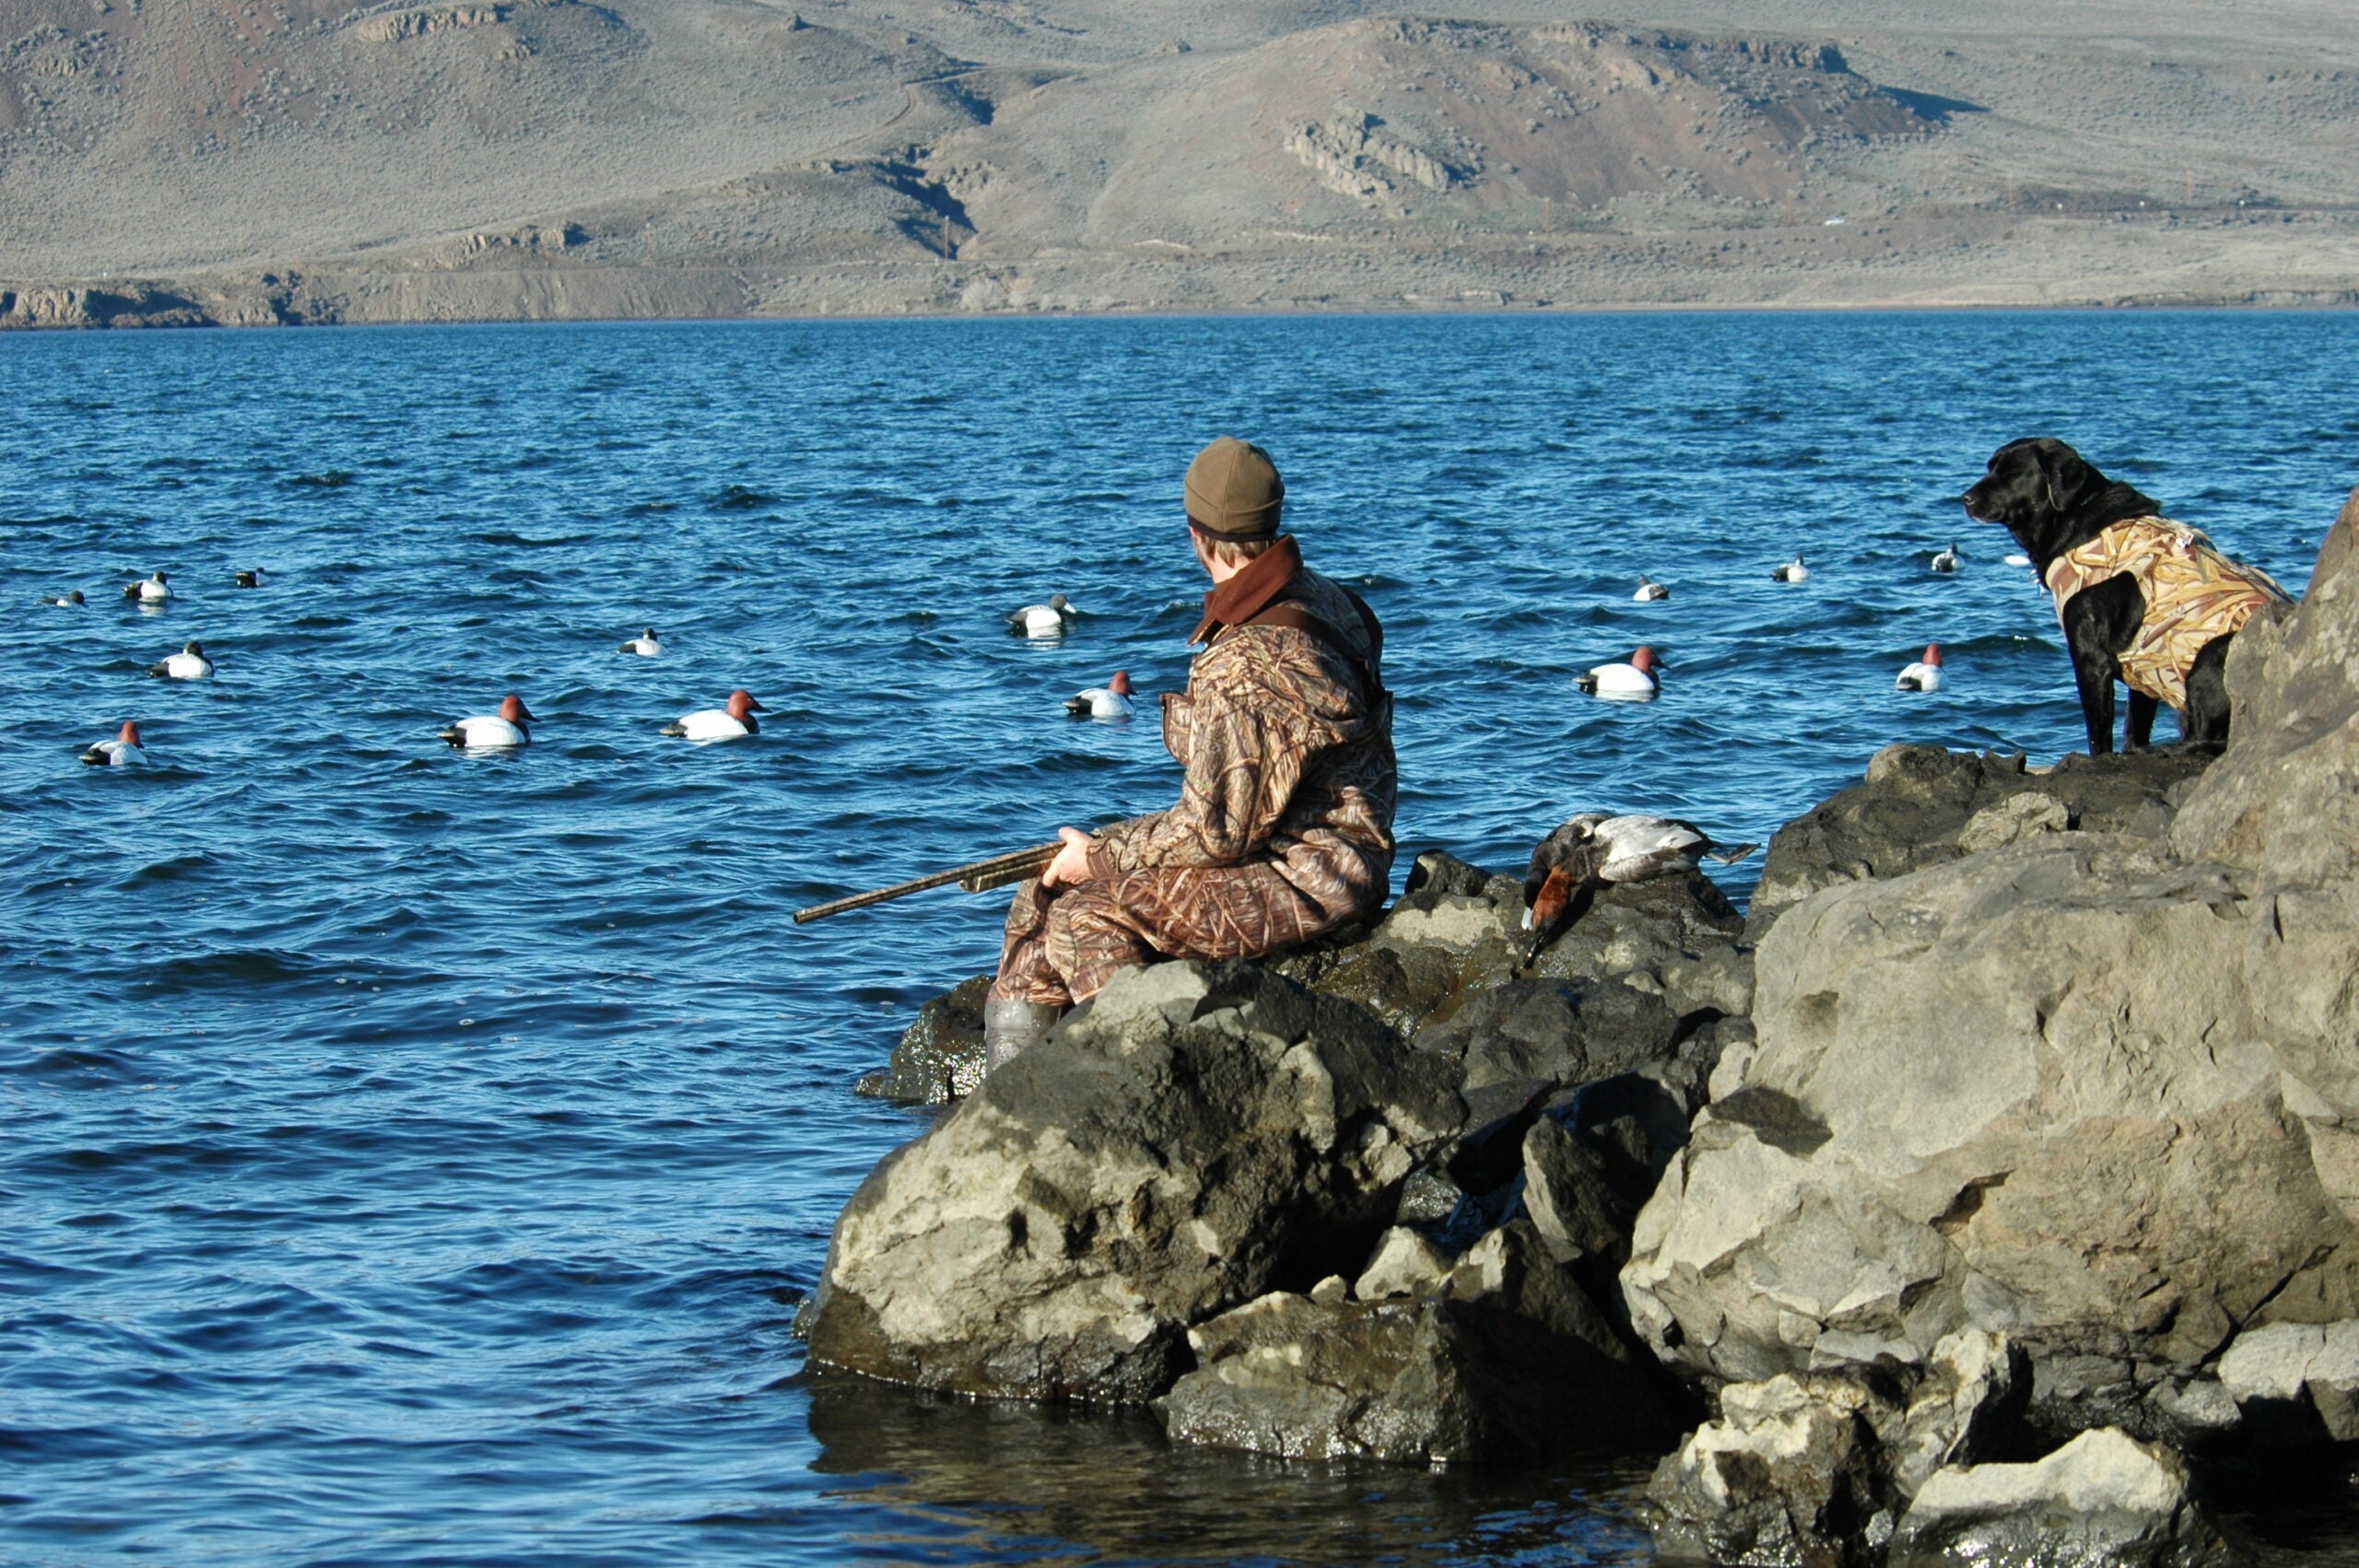 Man sitting on a rock with a dog hunting ducks.